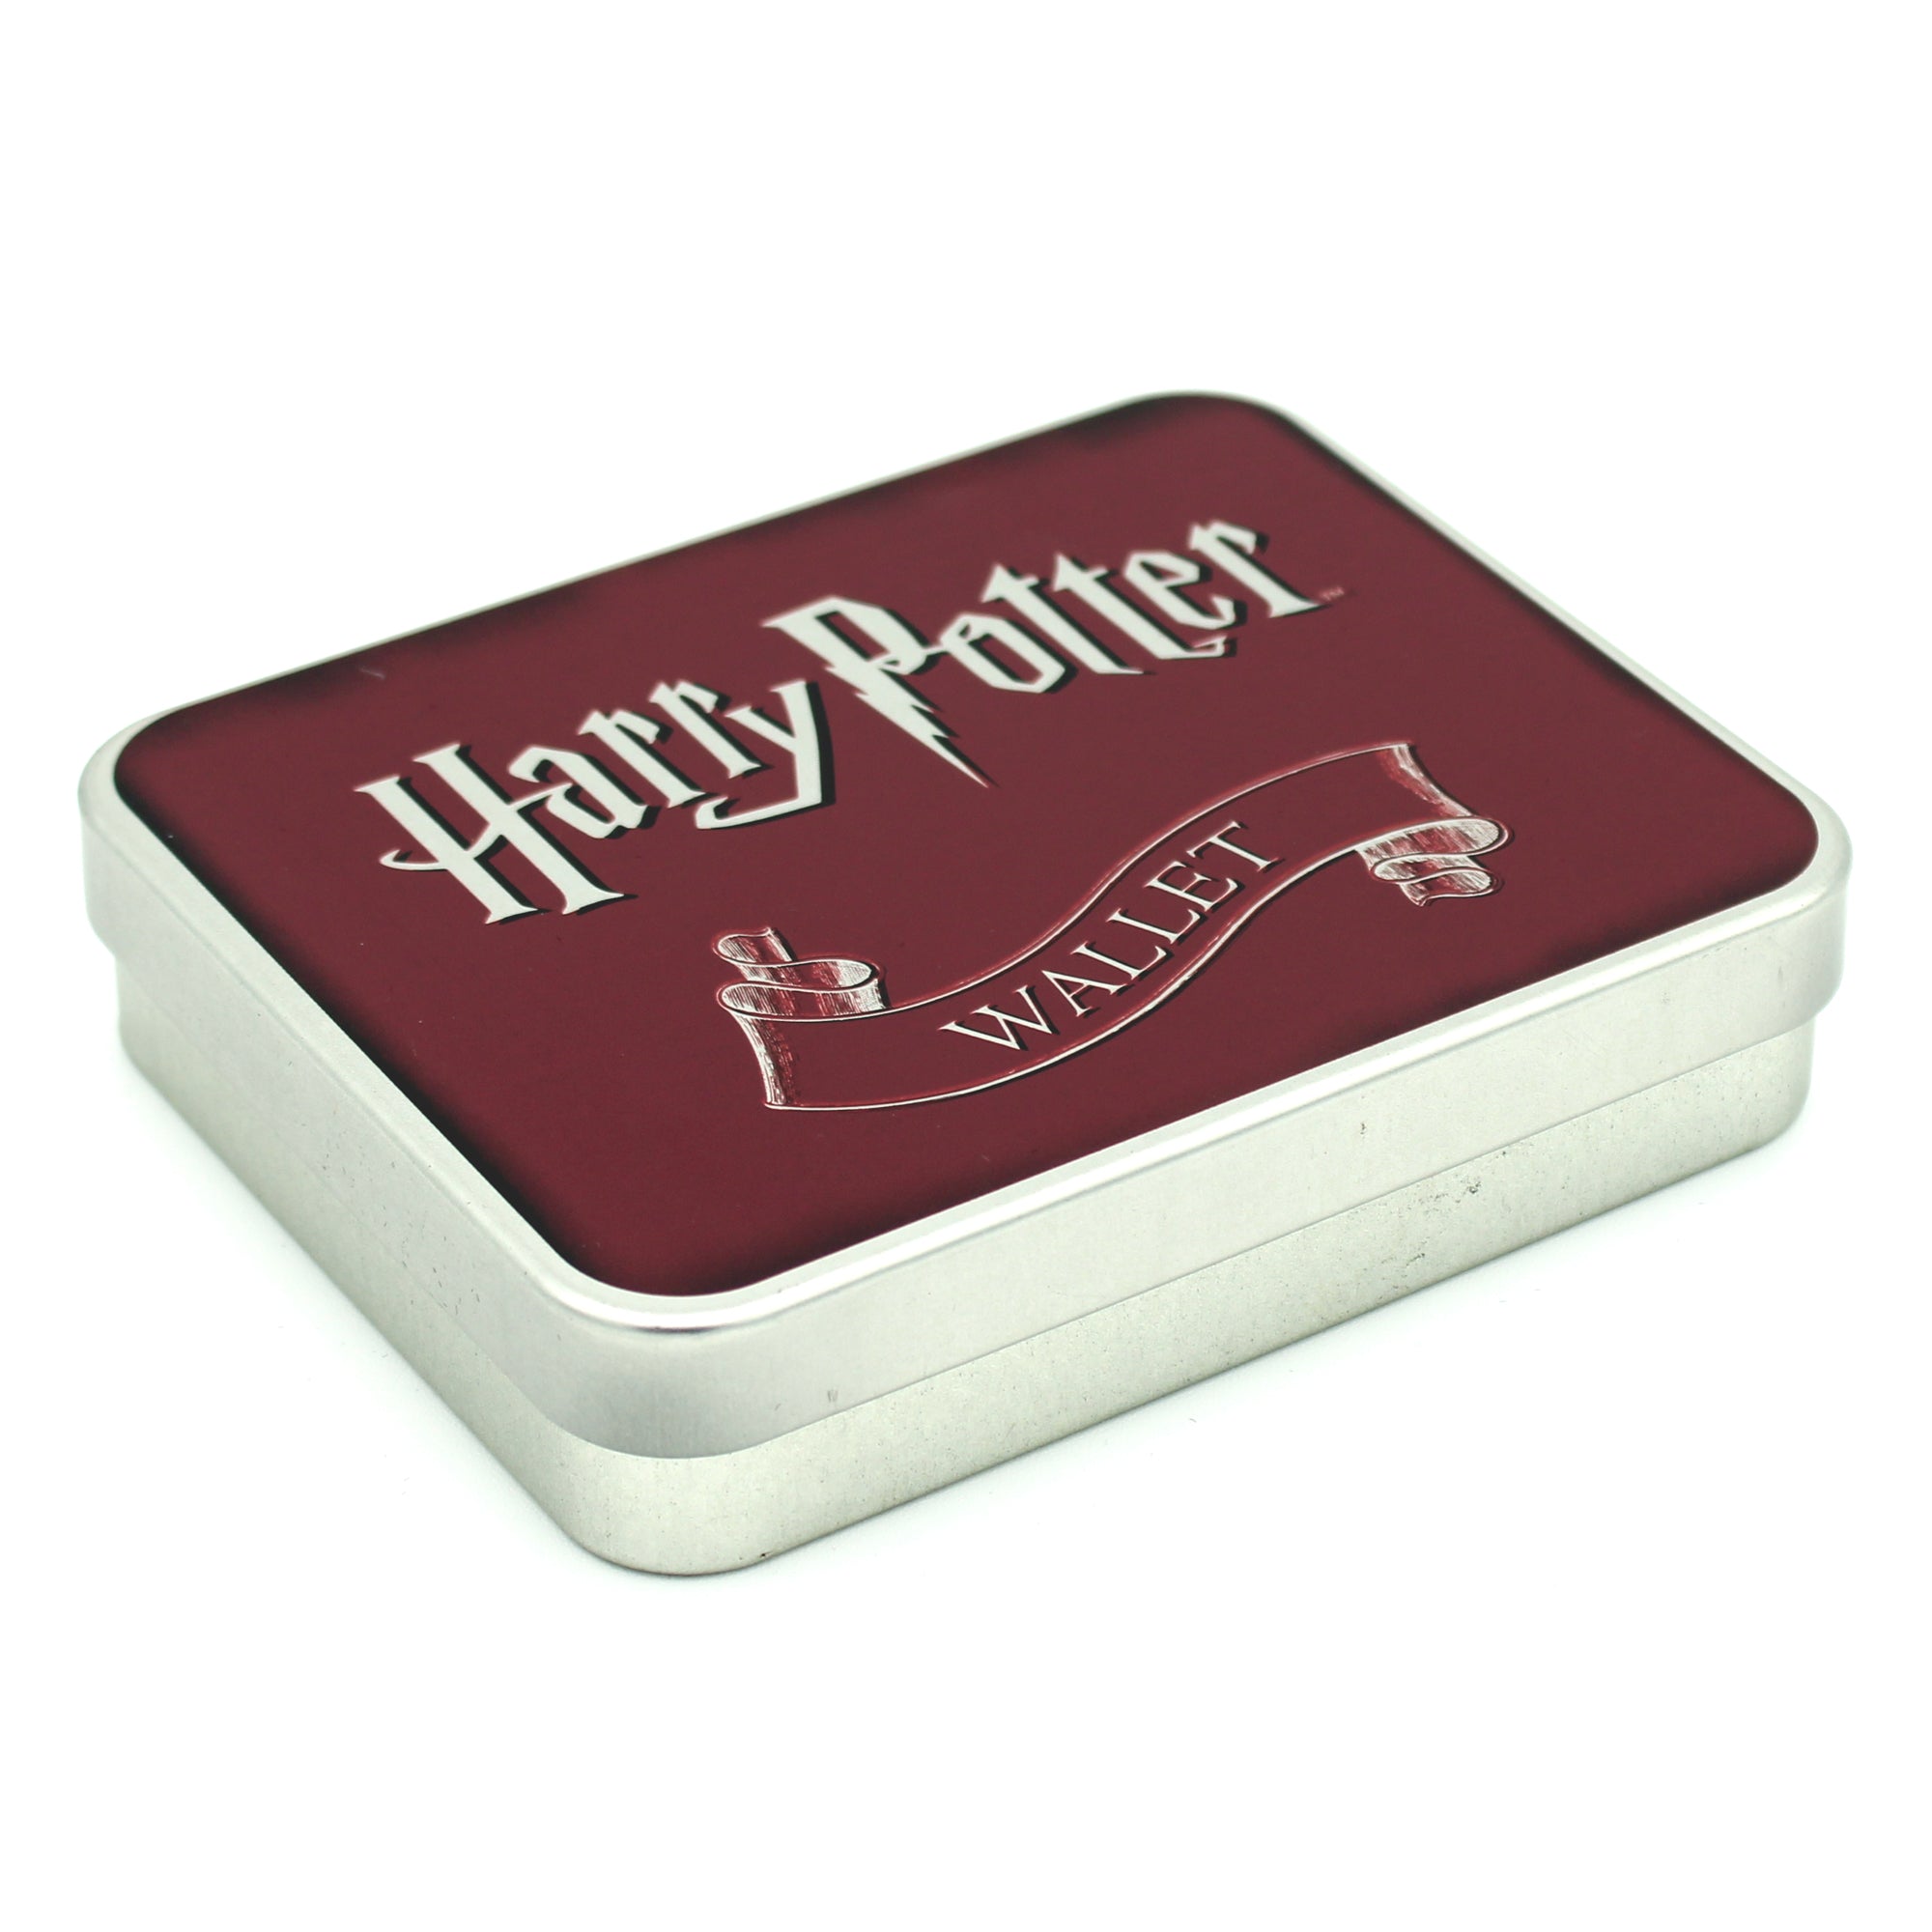 Harry Potter Wizarding World Bi-Fold Wallet with Gift Tin - Concept One - 4